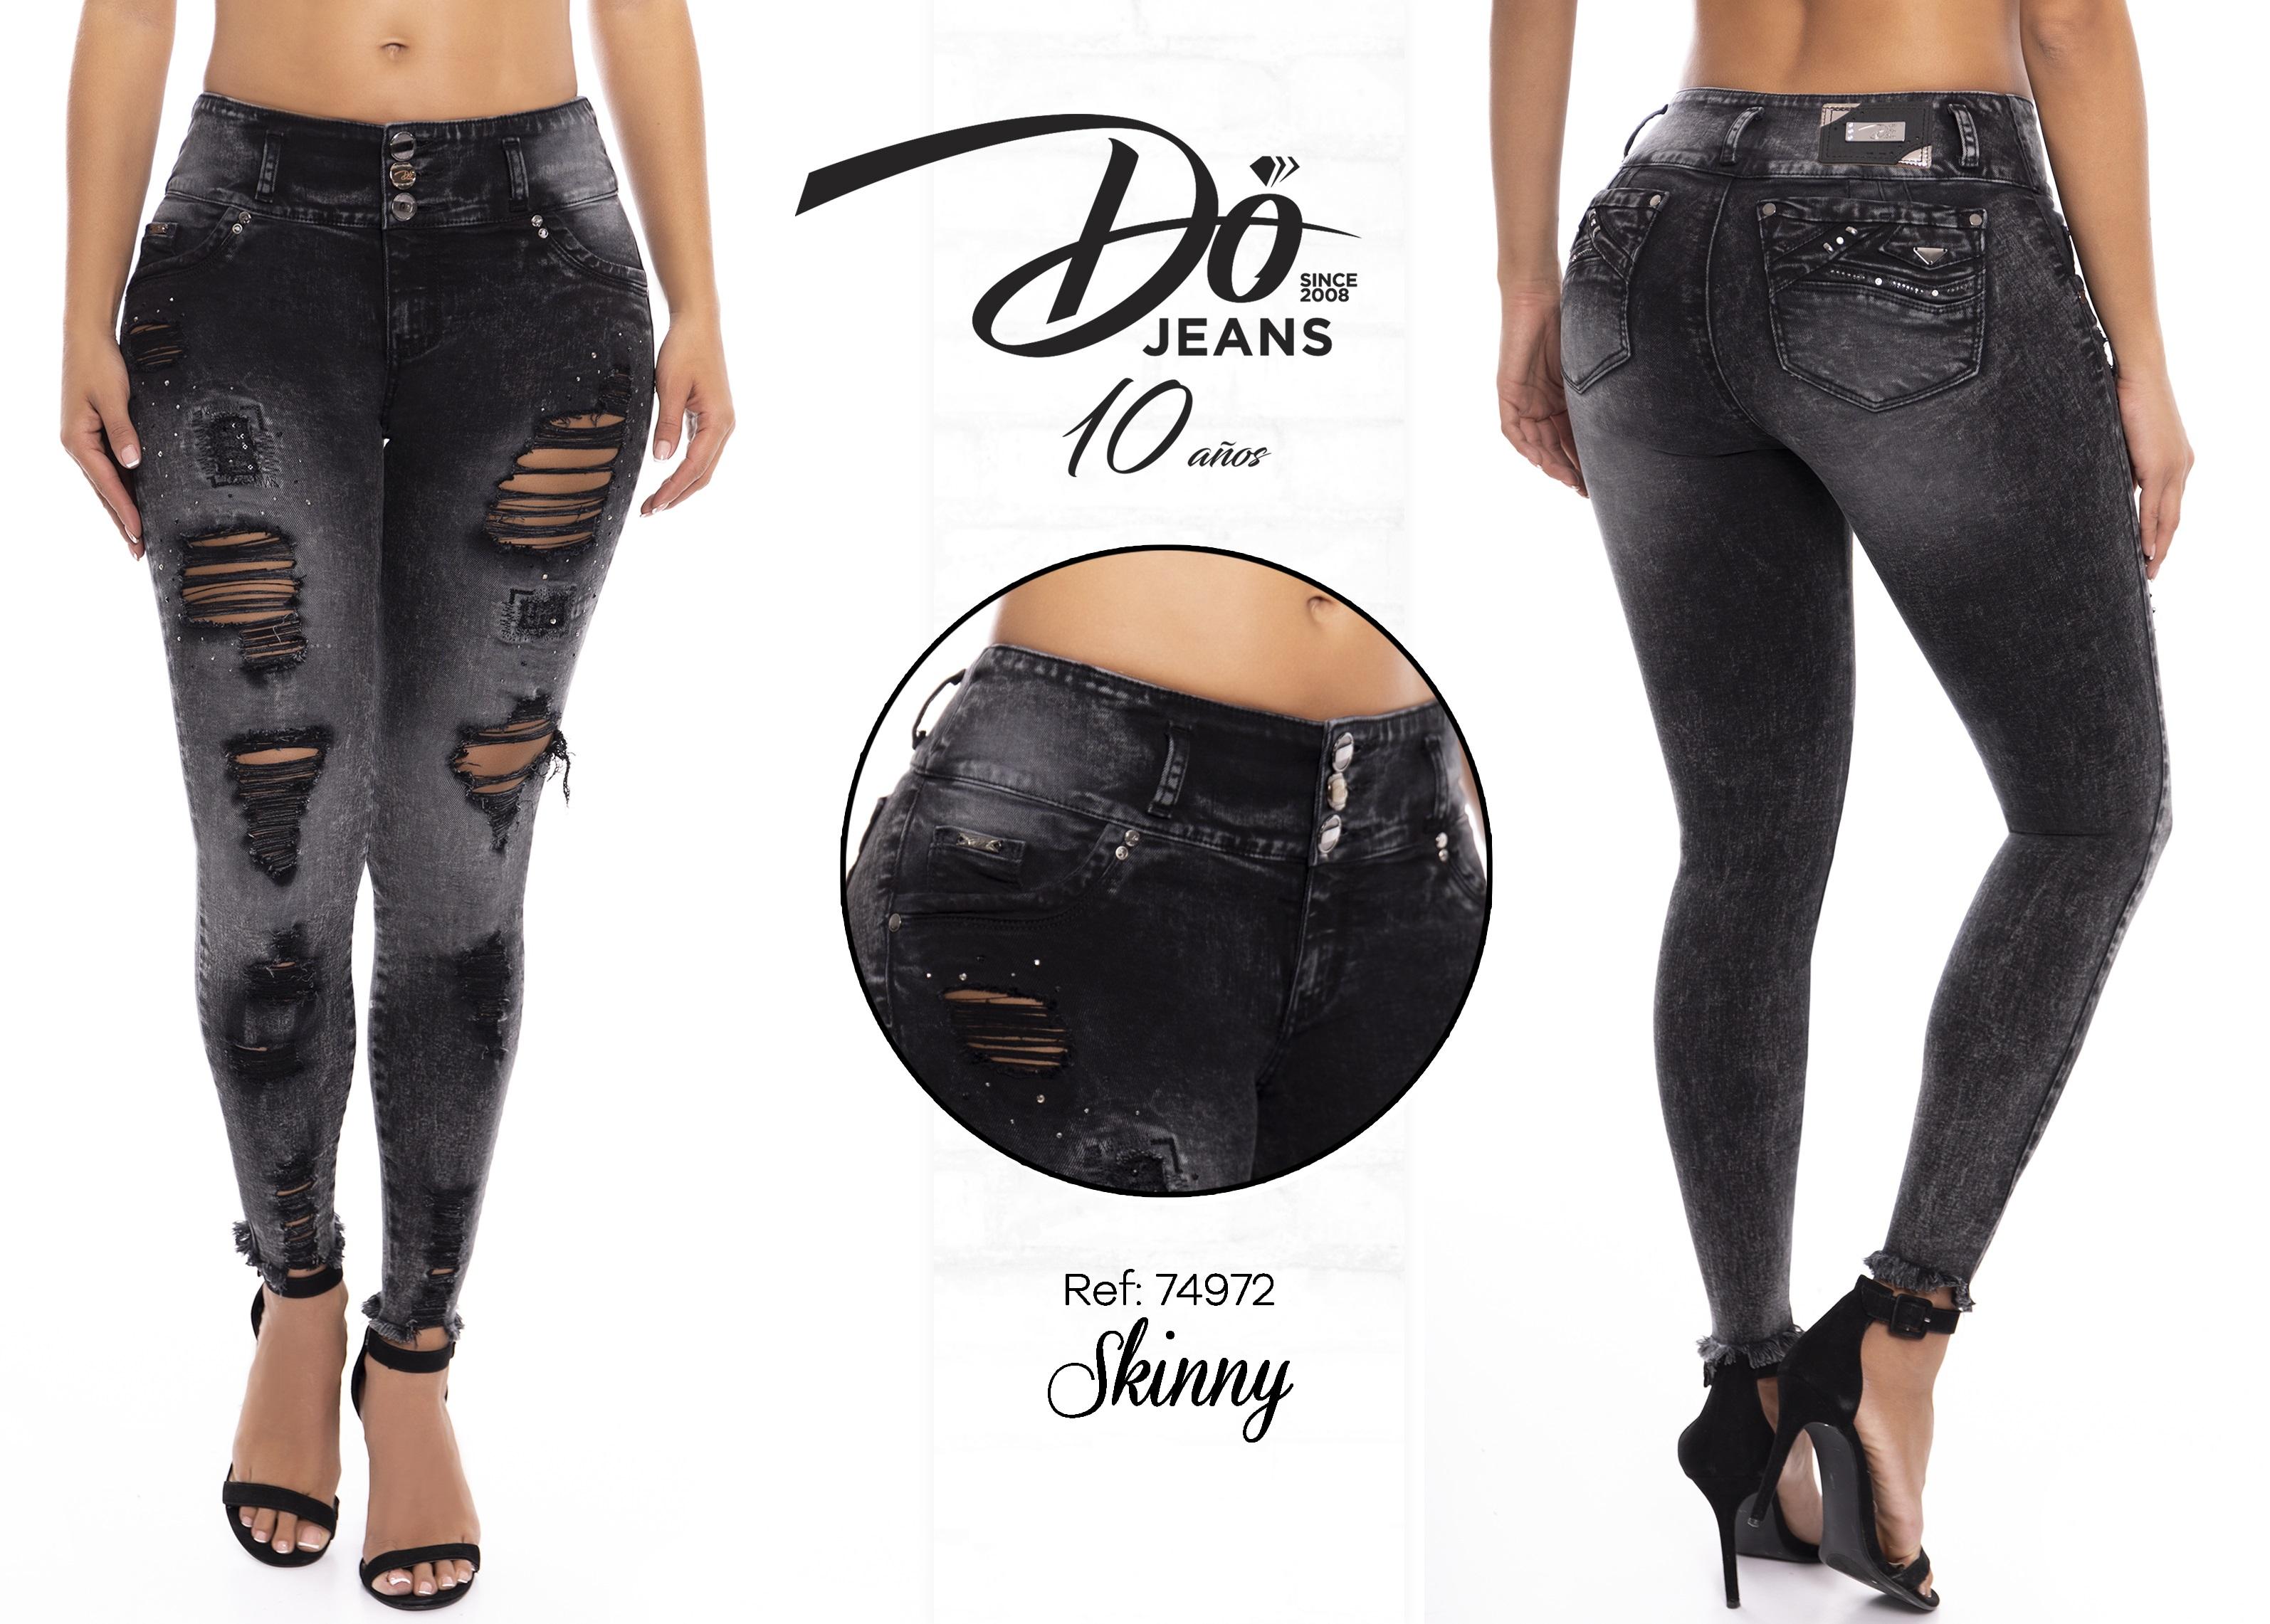 Jeans Levantacola Colombiano - Ref. 248 -74972 D